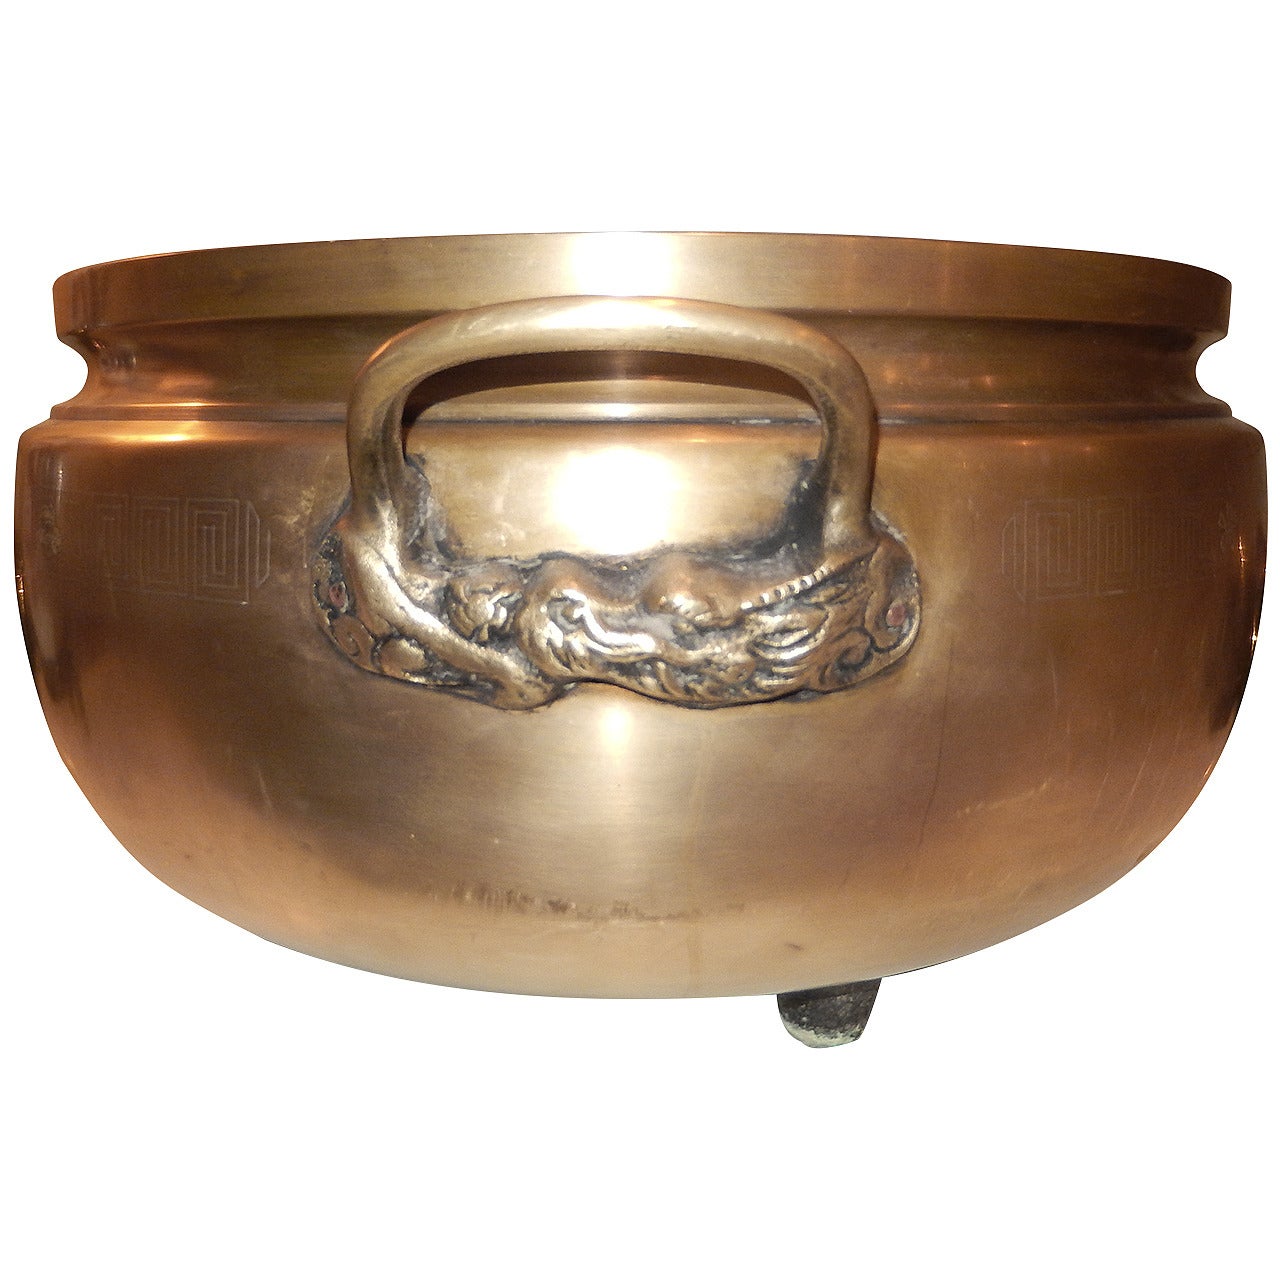 Late 19th Century Bronze Footed Planter